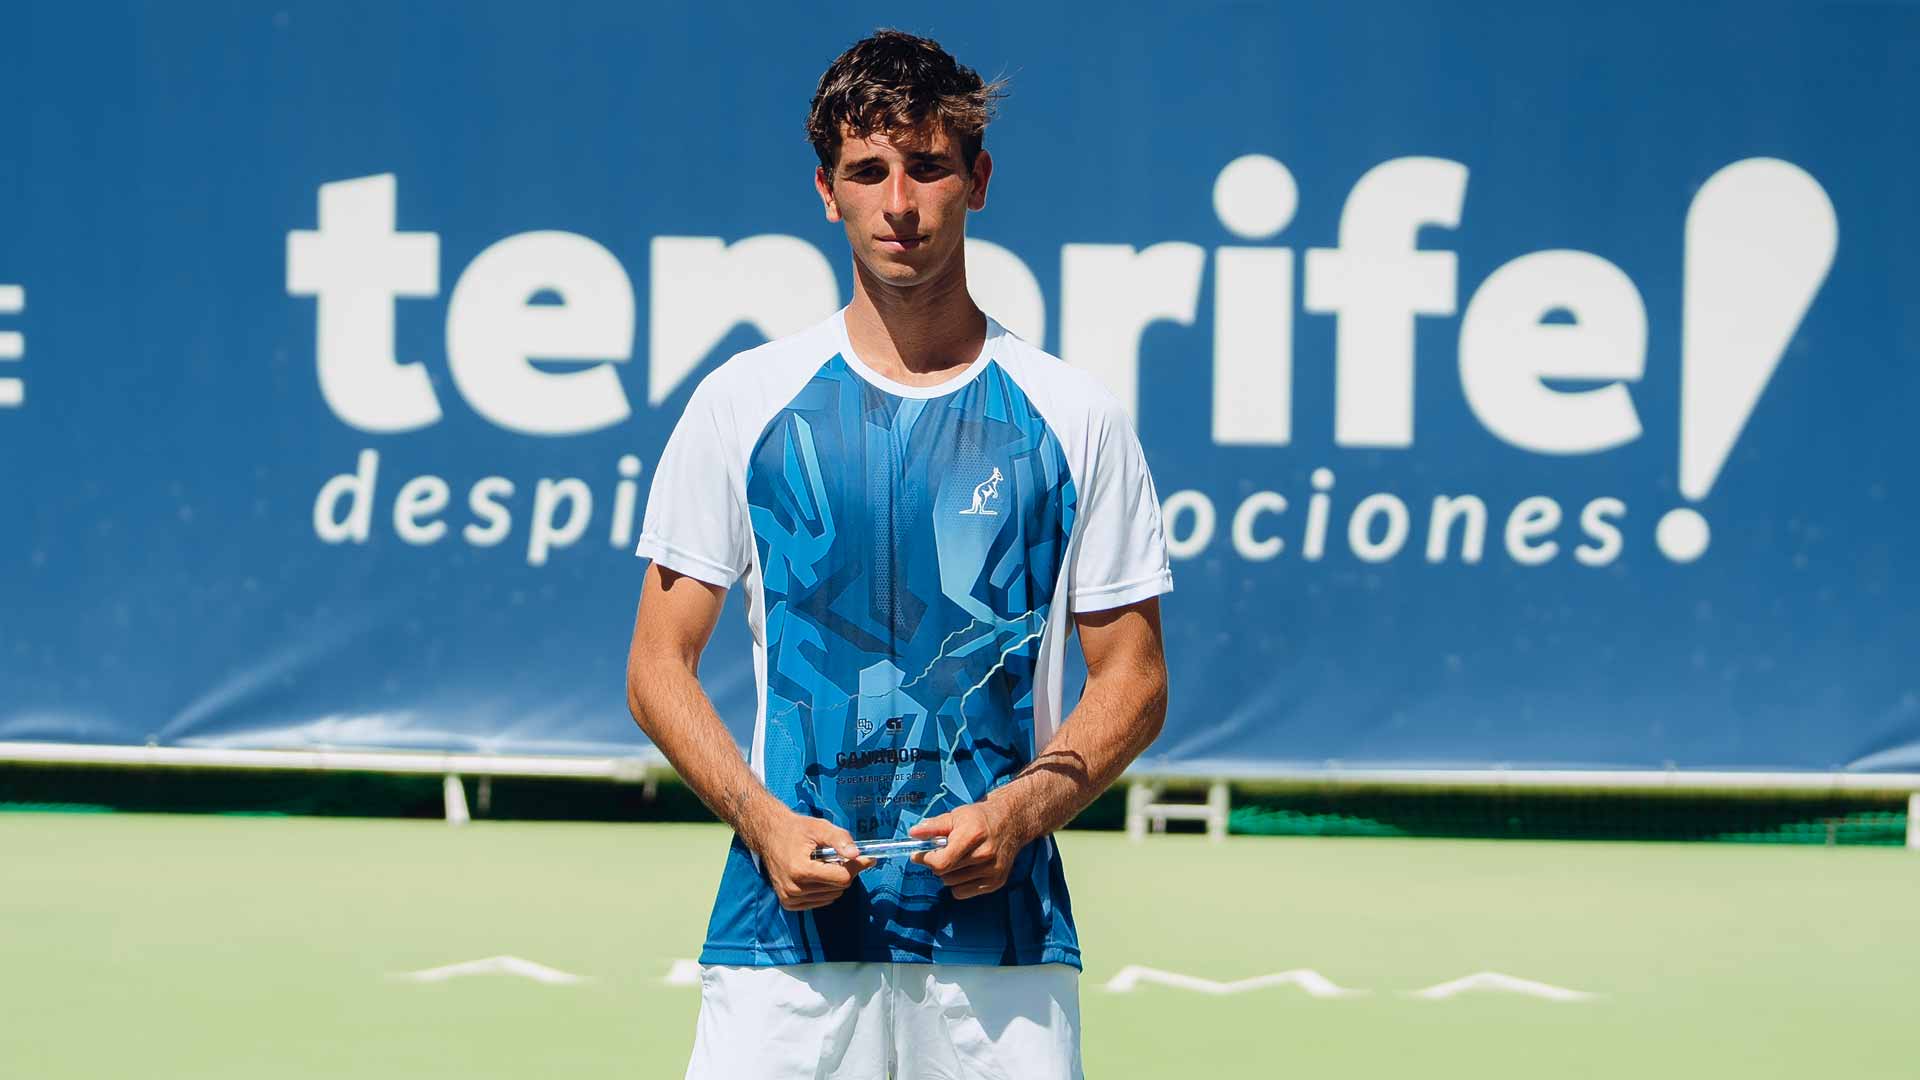 <a href='https://www.atptour.com/en/players/matteo-gigante/g0gd/overview'>Matteo Gigante</a> lifts a Challenger trophy in Tenerife for a second consecutive year.